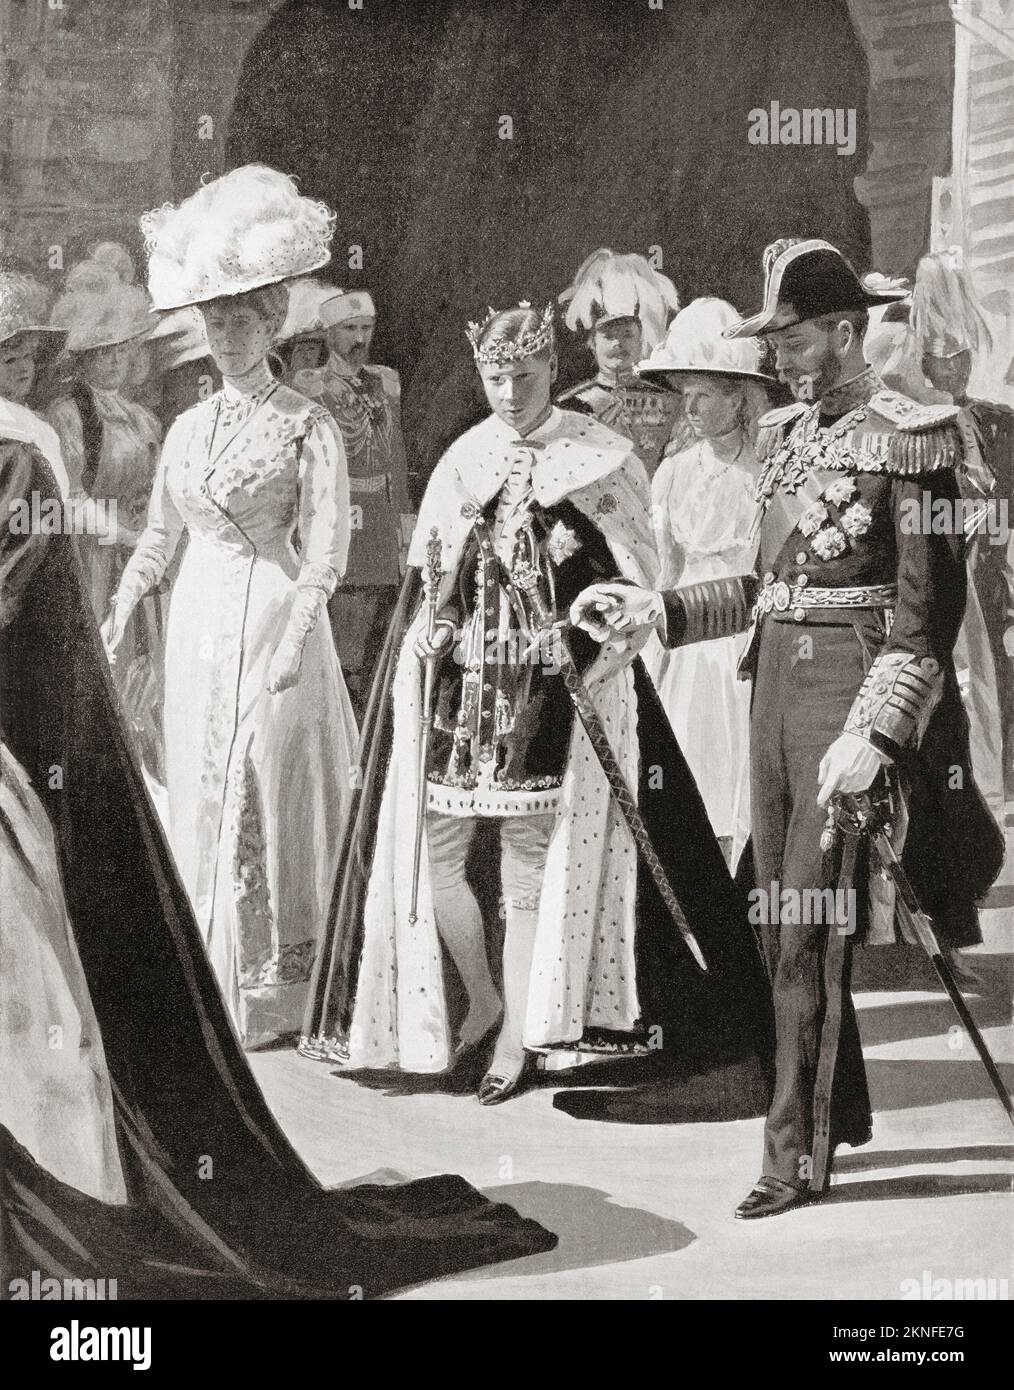 The Investiture of the Prince of Wales, Caernarvon Castle, Wales, 1911. From left to right, Mary of Teck, 1867 – 1953.  Queen consort of the United Kingdom.  Edward VIII, 1894 – 1972. Prince of Wales and future King of the United Kingdom. George V, 1865 – 1936.  King of the United Kingdom. Stock Photo